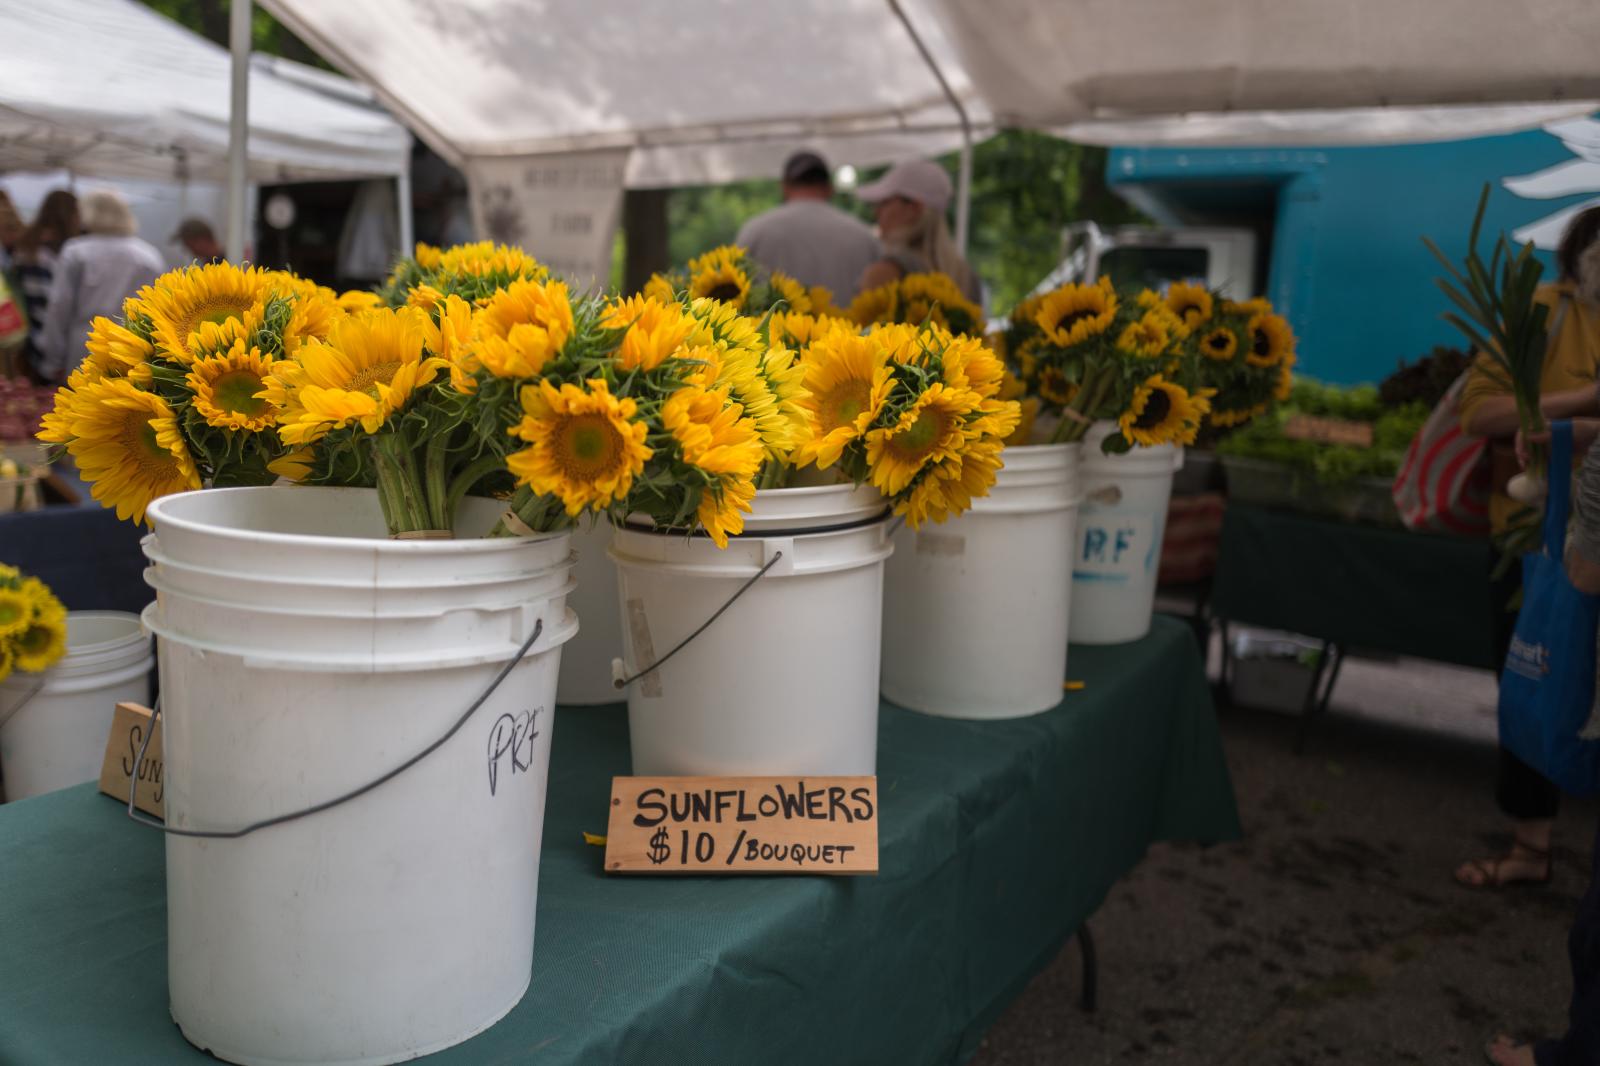 Farmers Market Sunflowers | Buy this image